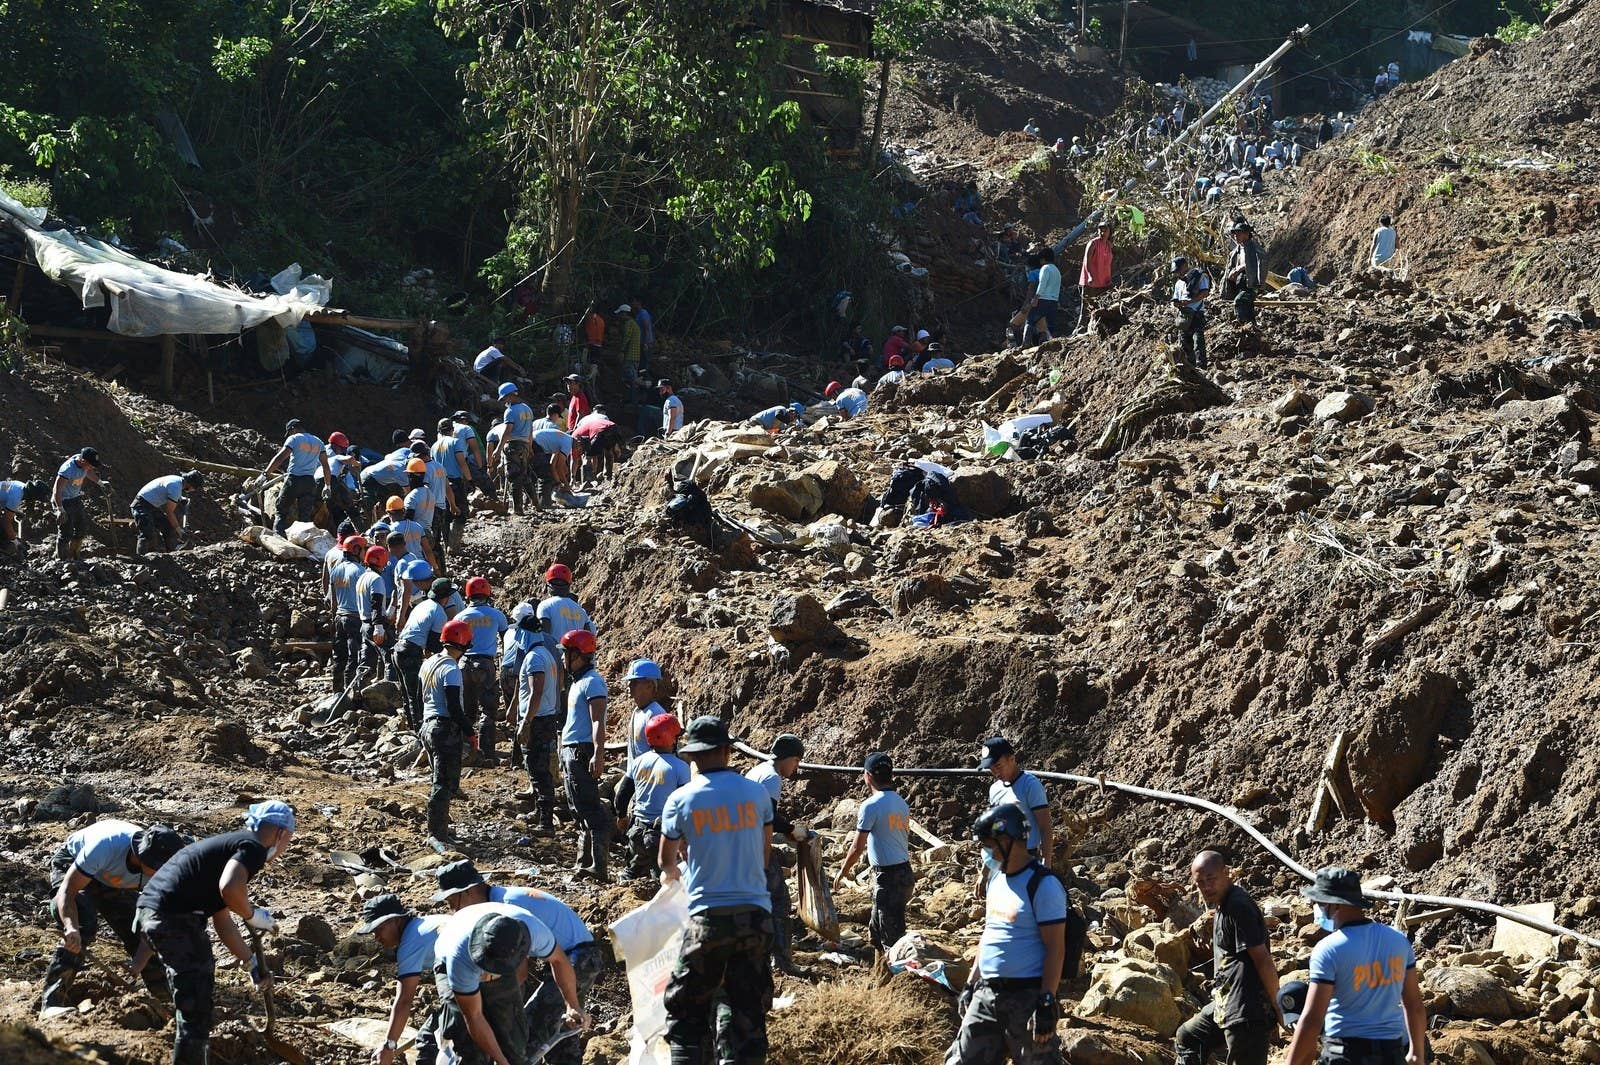 Rescuers dig at a landslide site where dozens of residents are believed to have been buried during heavy rains at the height of Typhoon Mangkhut in Itogon, Benguet province, the Philippines, on Sept. 18.